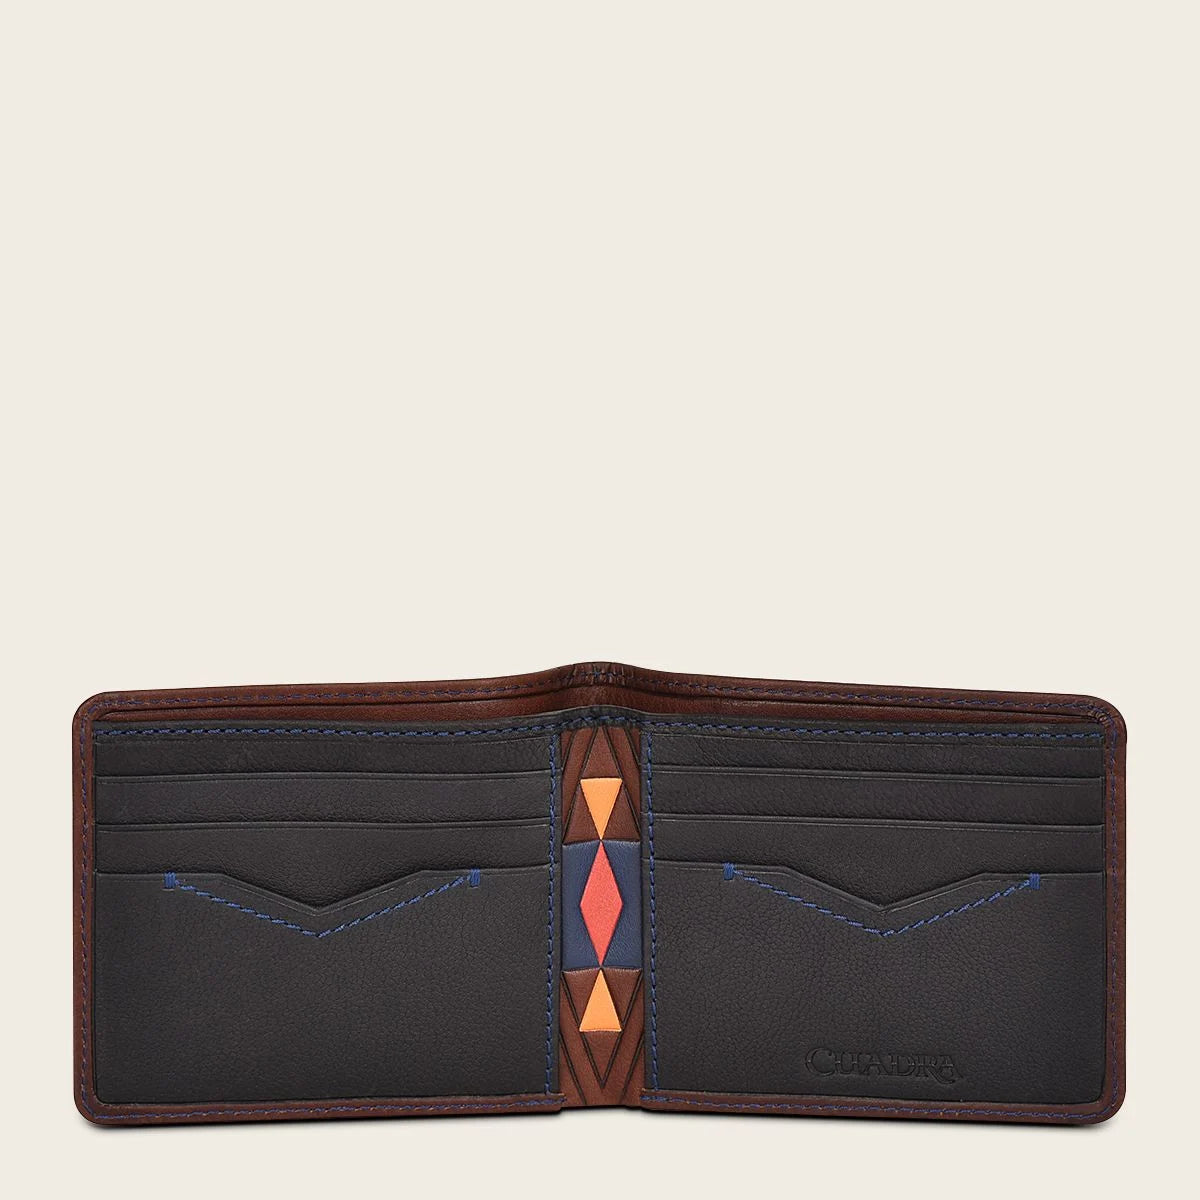 Brown bovine leather wallet with contrasting color details